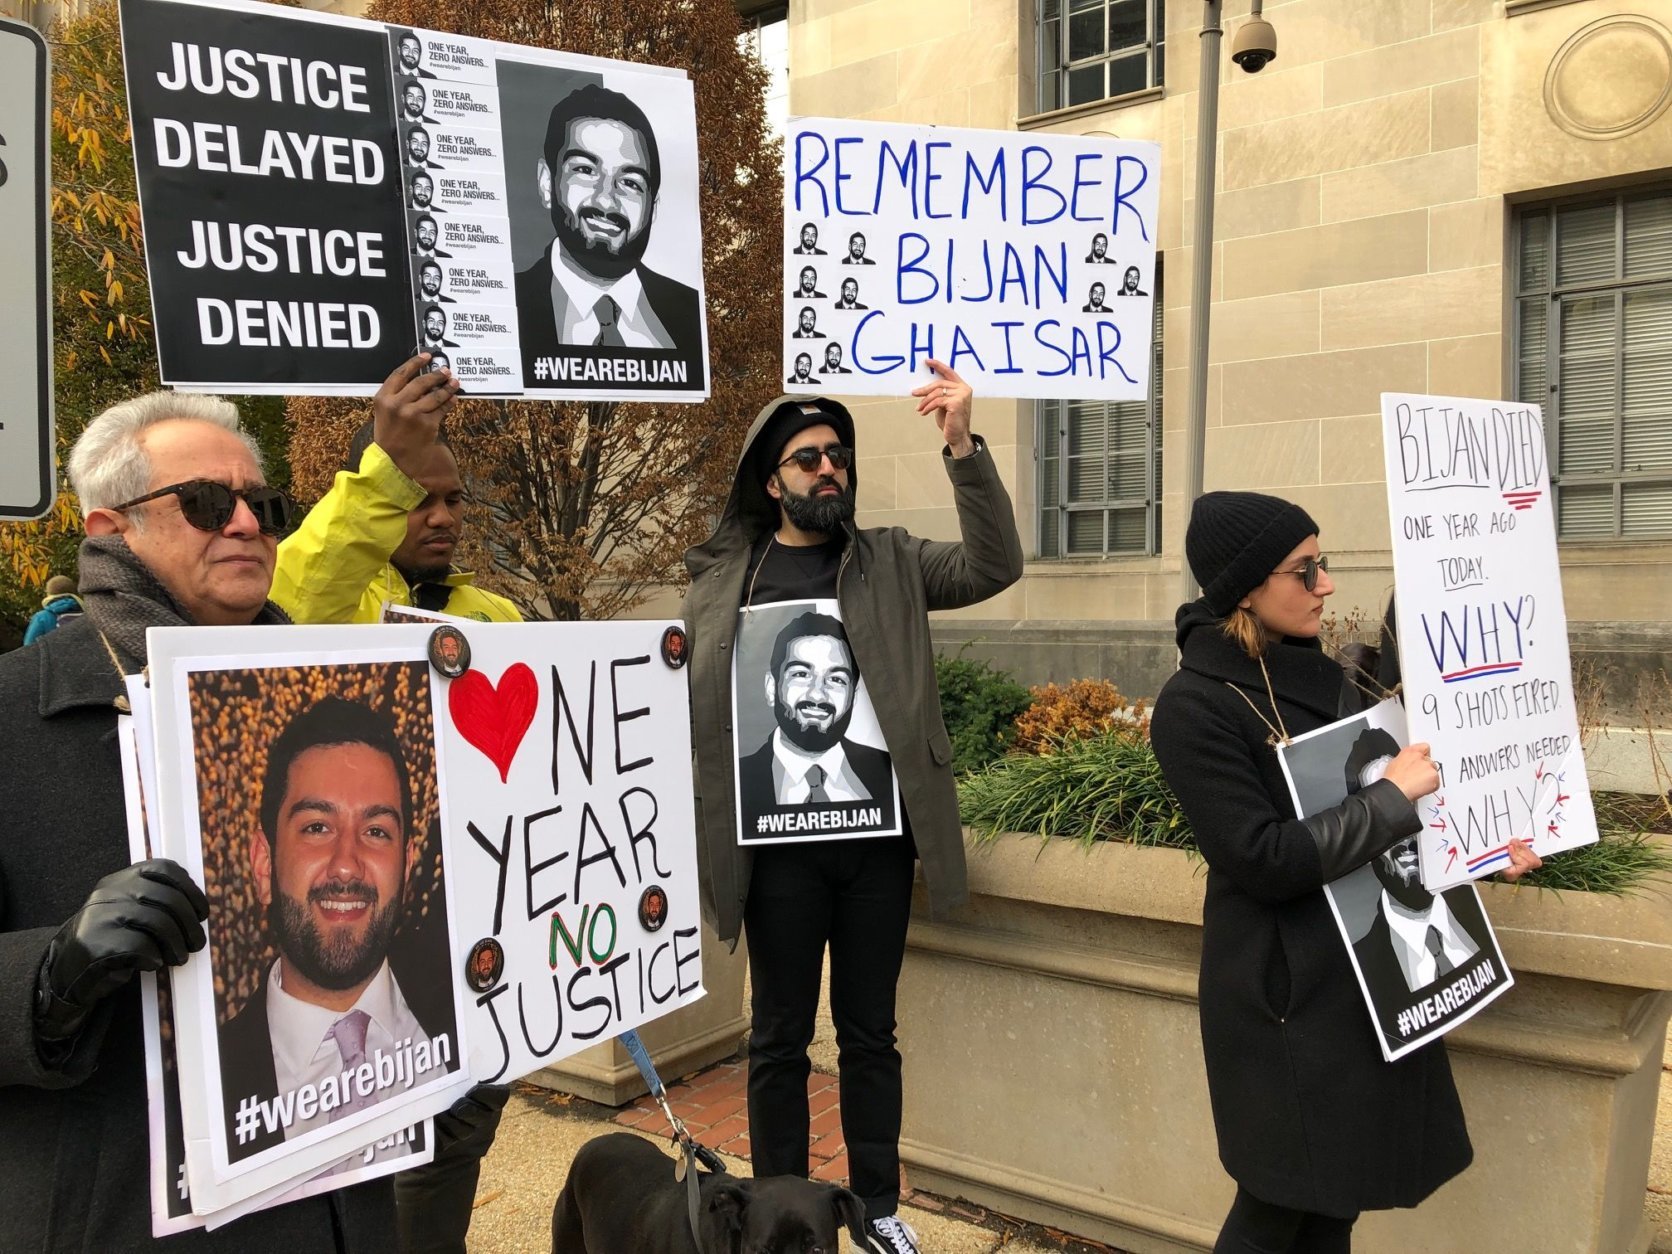 One year after Bijan Ghaisar died, family members gathered outside the U.S. Justice Department, seeking accountability. (WTOP/Neal Augenstein)